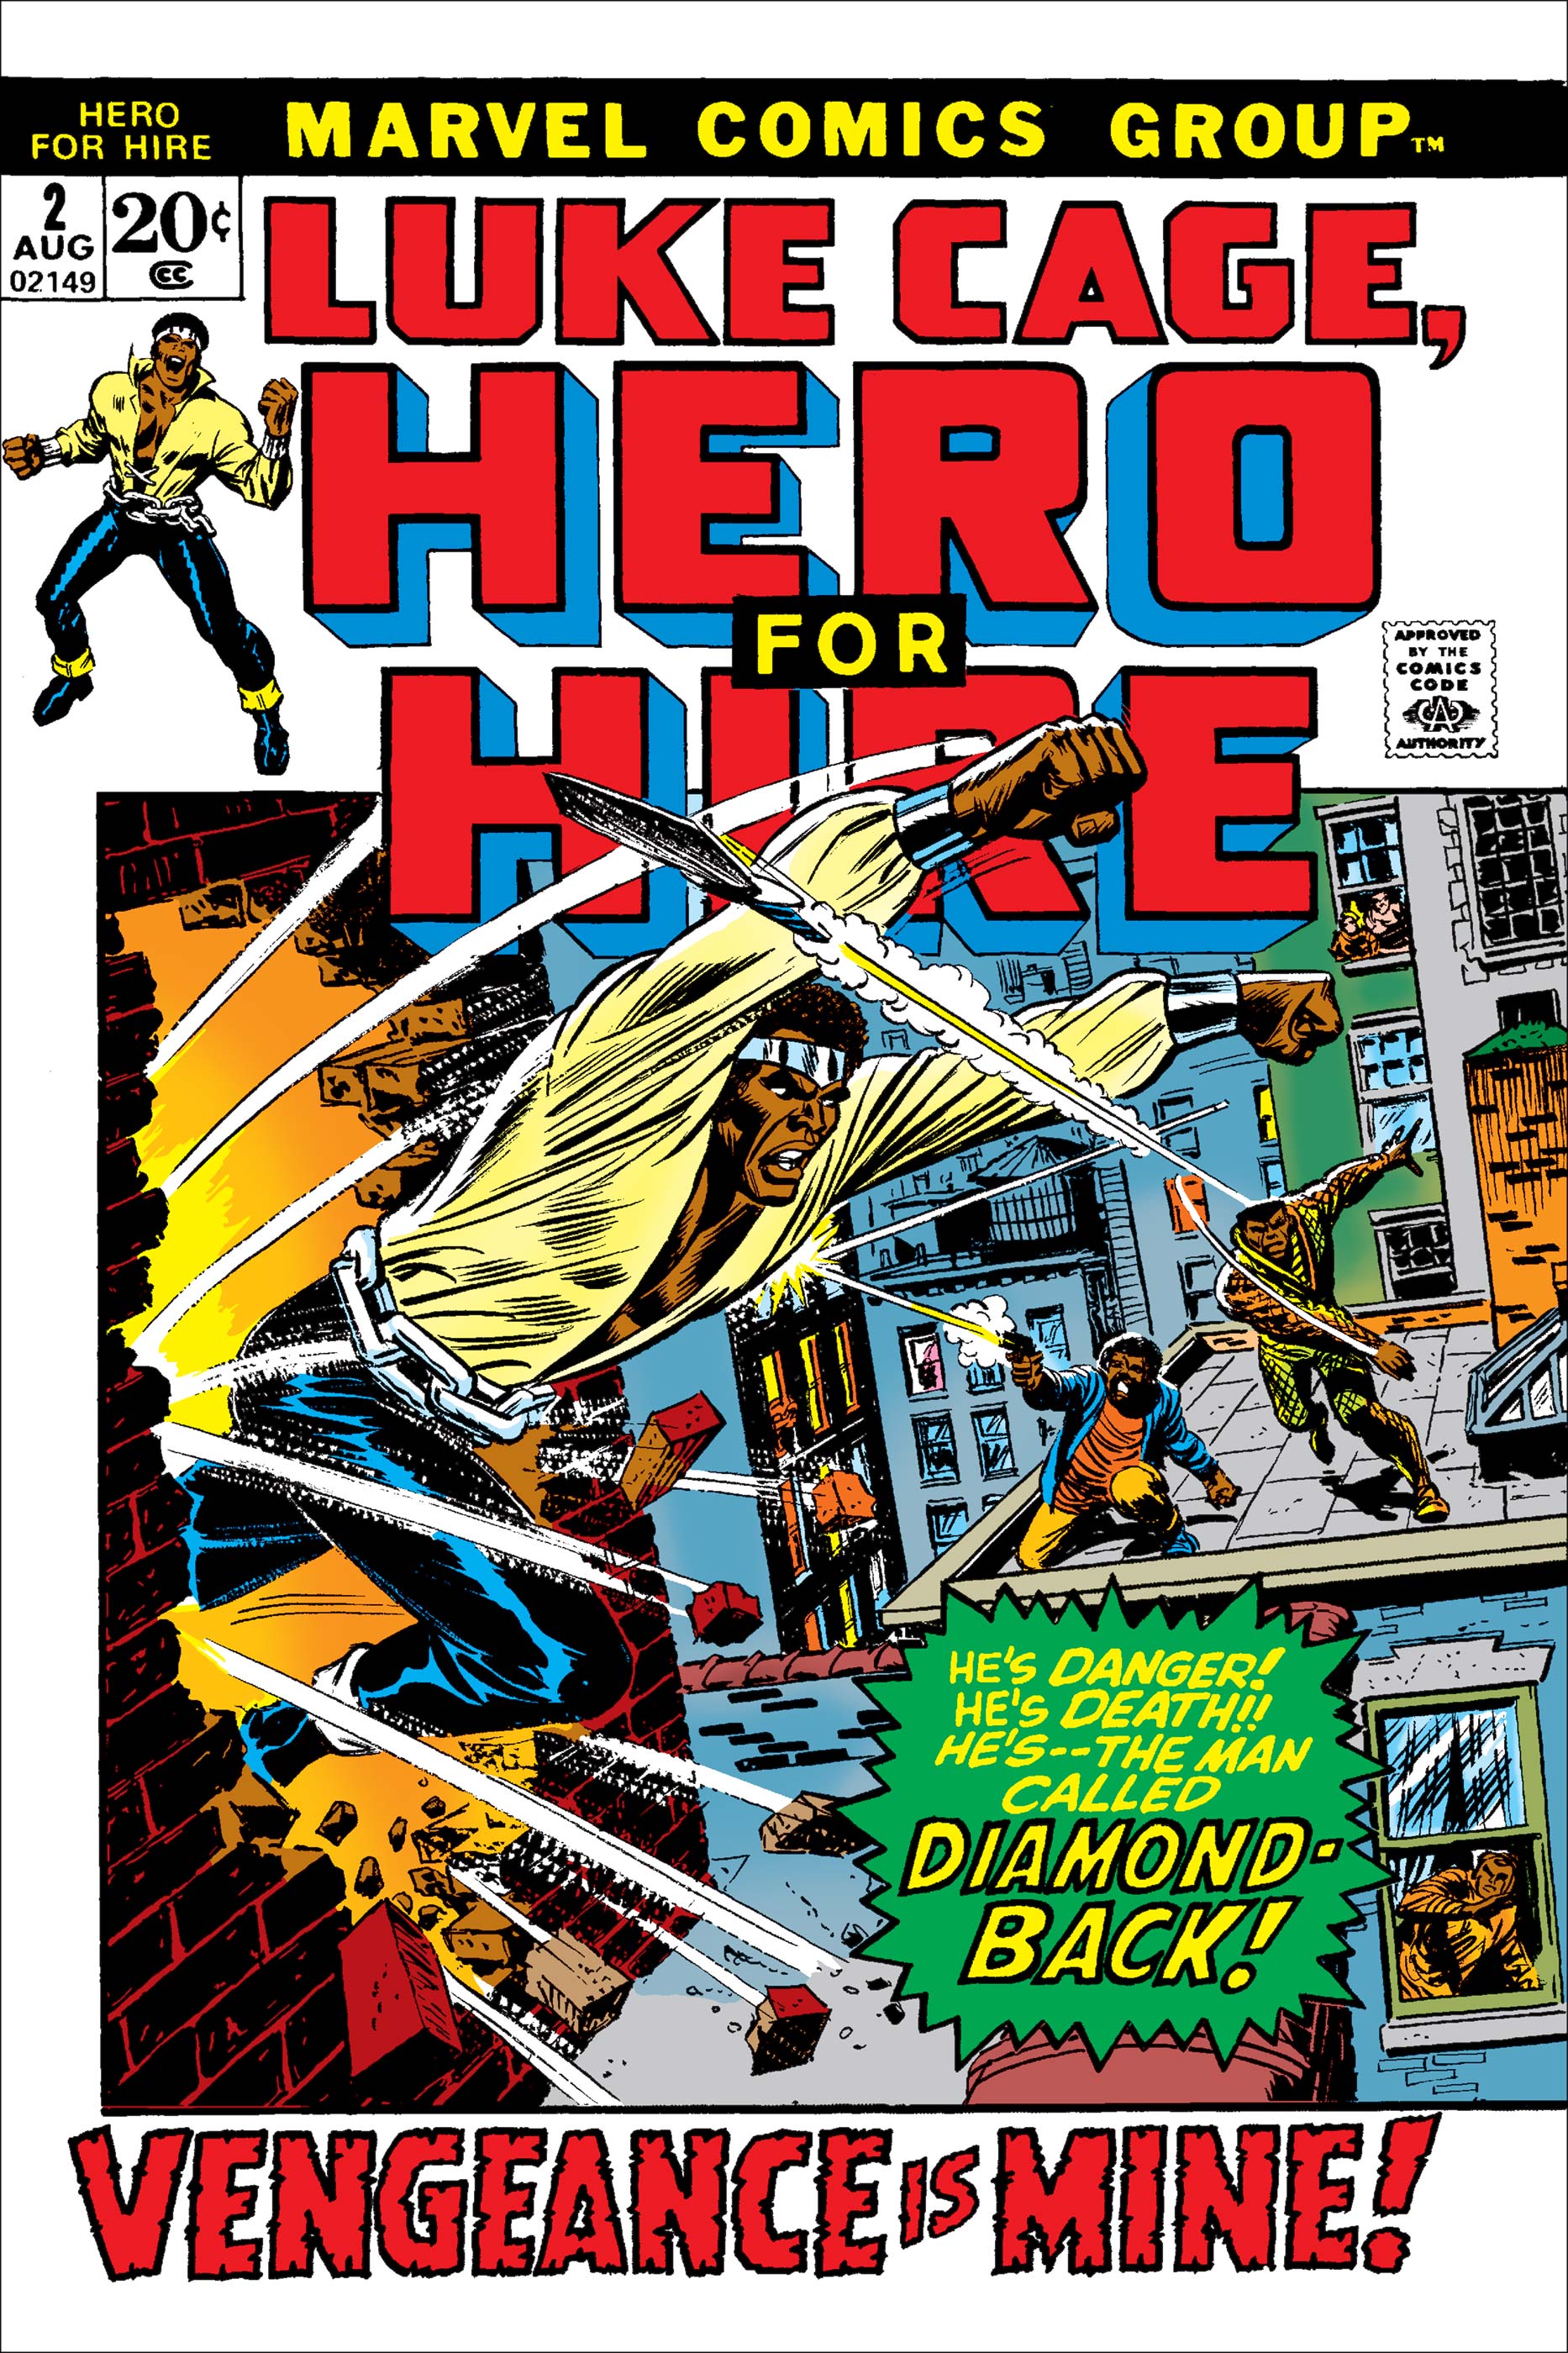 Hero for Hire (1972) #2